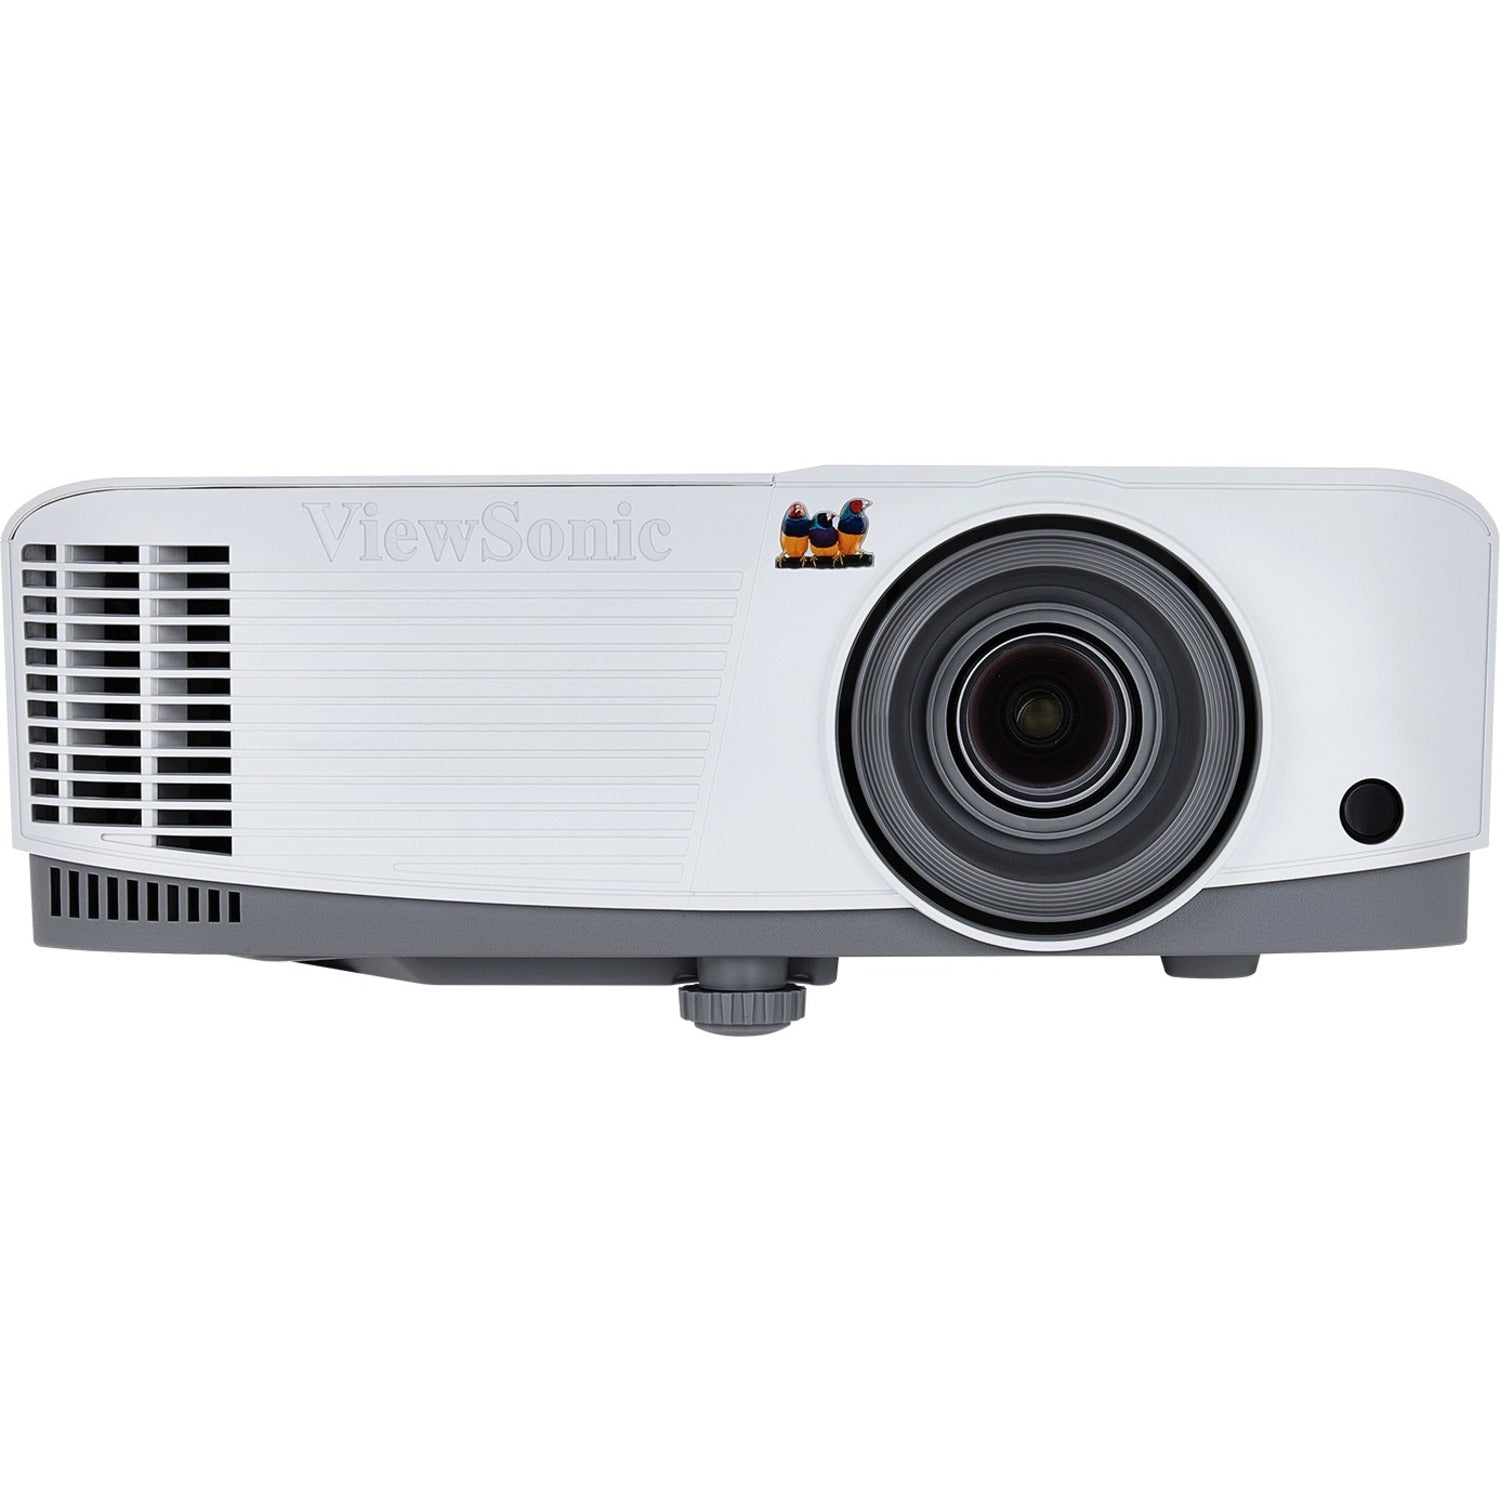 viewsonic-pa503s-3800-lumens-svga-high-brightness-projector-for-home-and-office-with-hdmi-vertical-keystone-pa503s-3800-lumens-svga-high-brightness-projector-with-hdmi-vertical-keystone_vewpa503s - 1